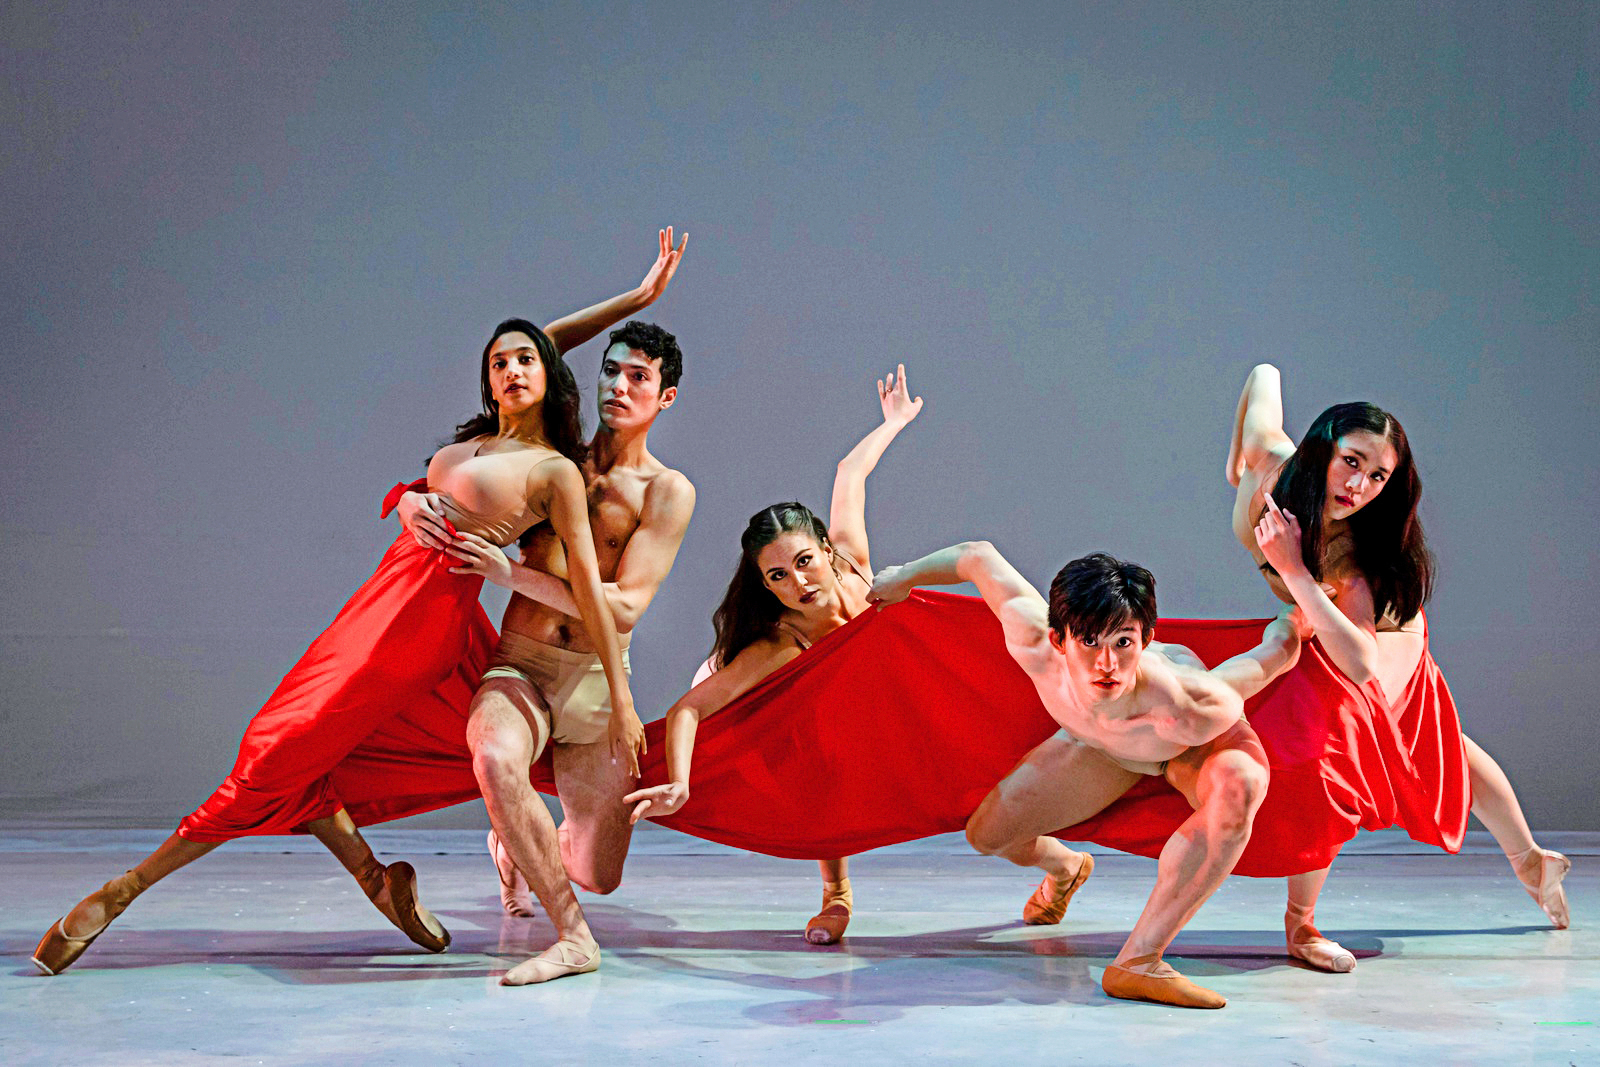 In front of a gray backdrop, a group of five dancers (3 female, 2 male) pose together in a contemporary tableau. They wear nude-colored garments, with the women in long red skirts.